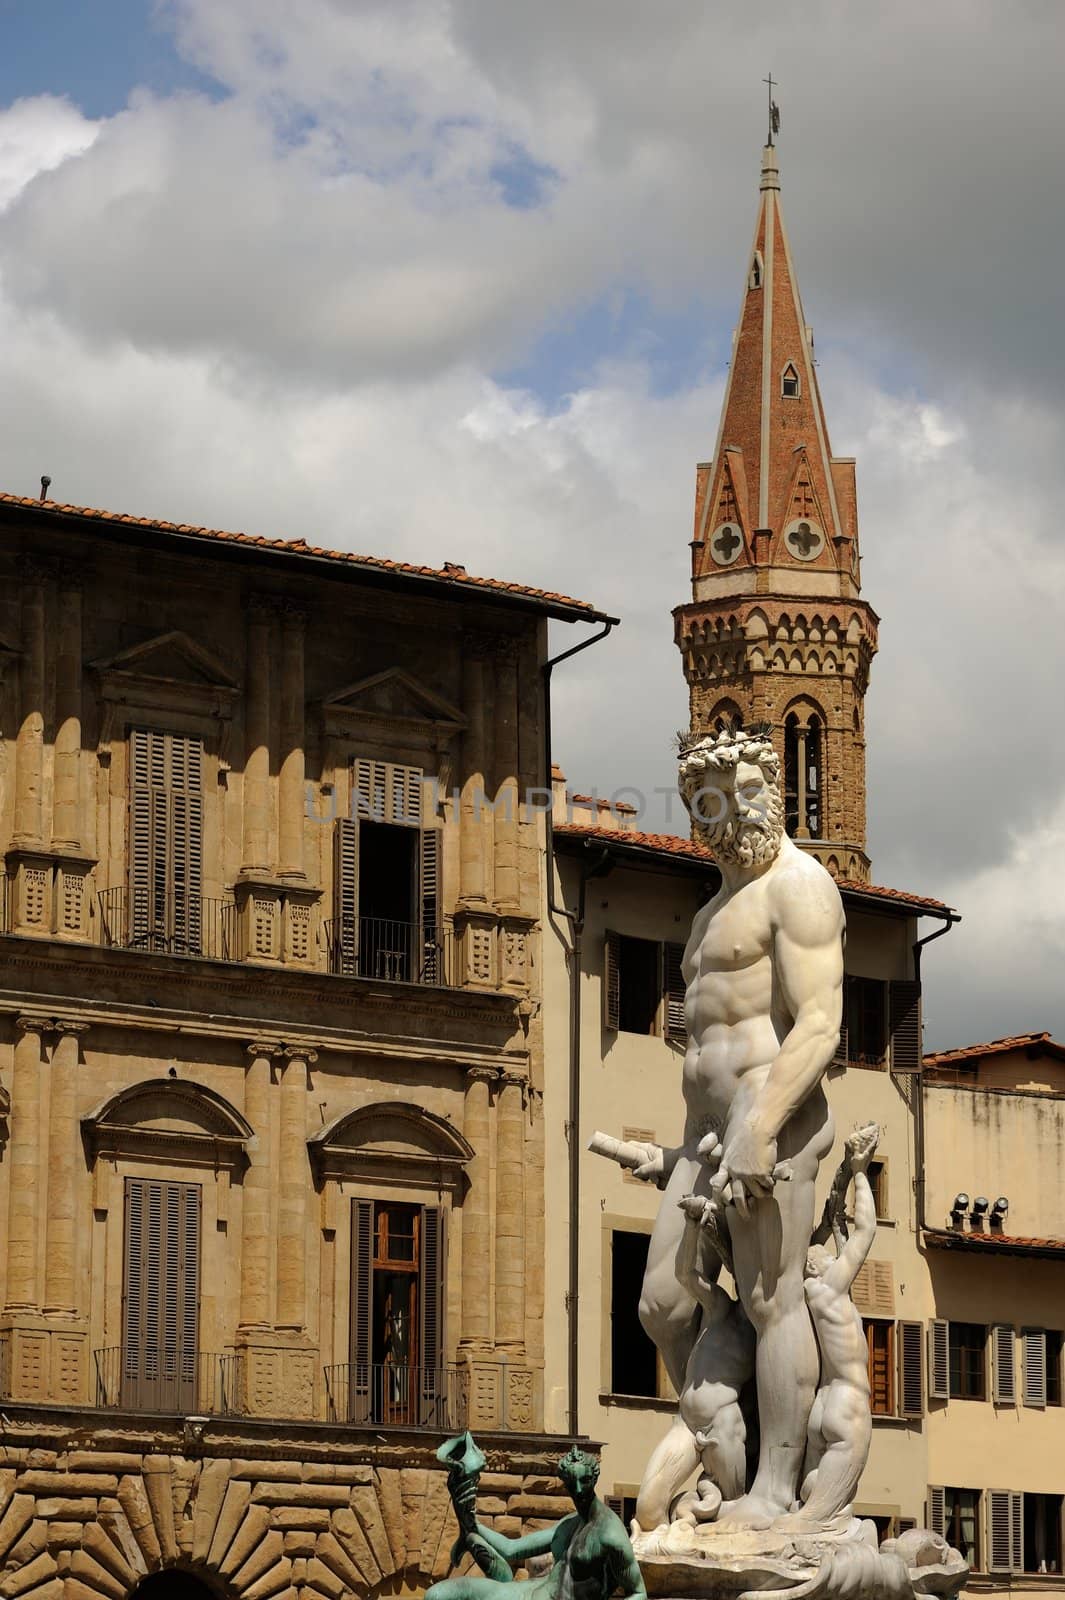 A mirable sculputure in the italian open air of Tuscany